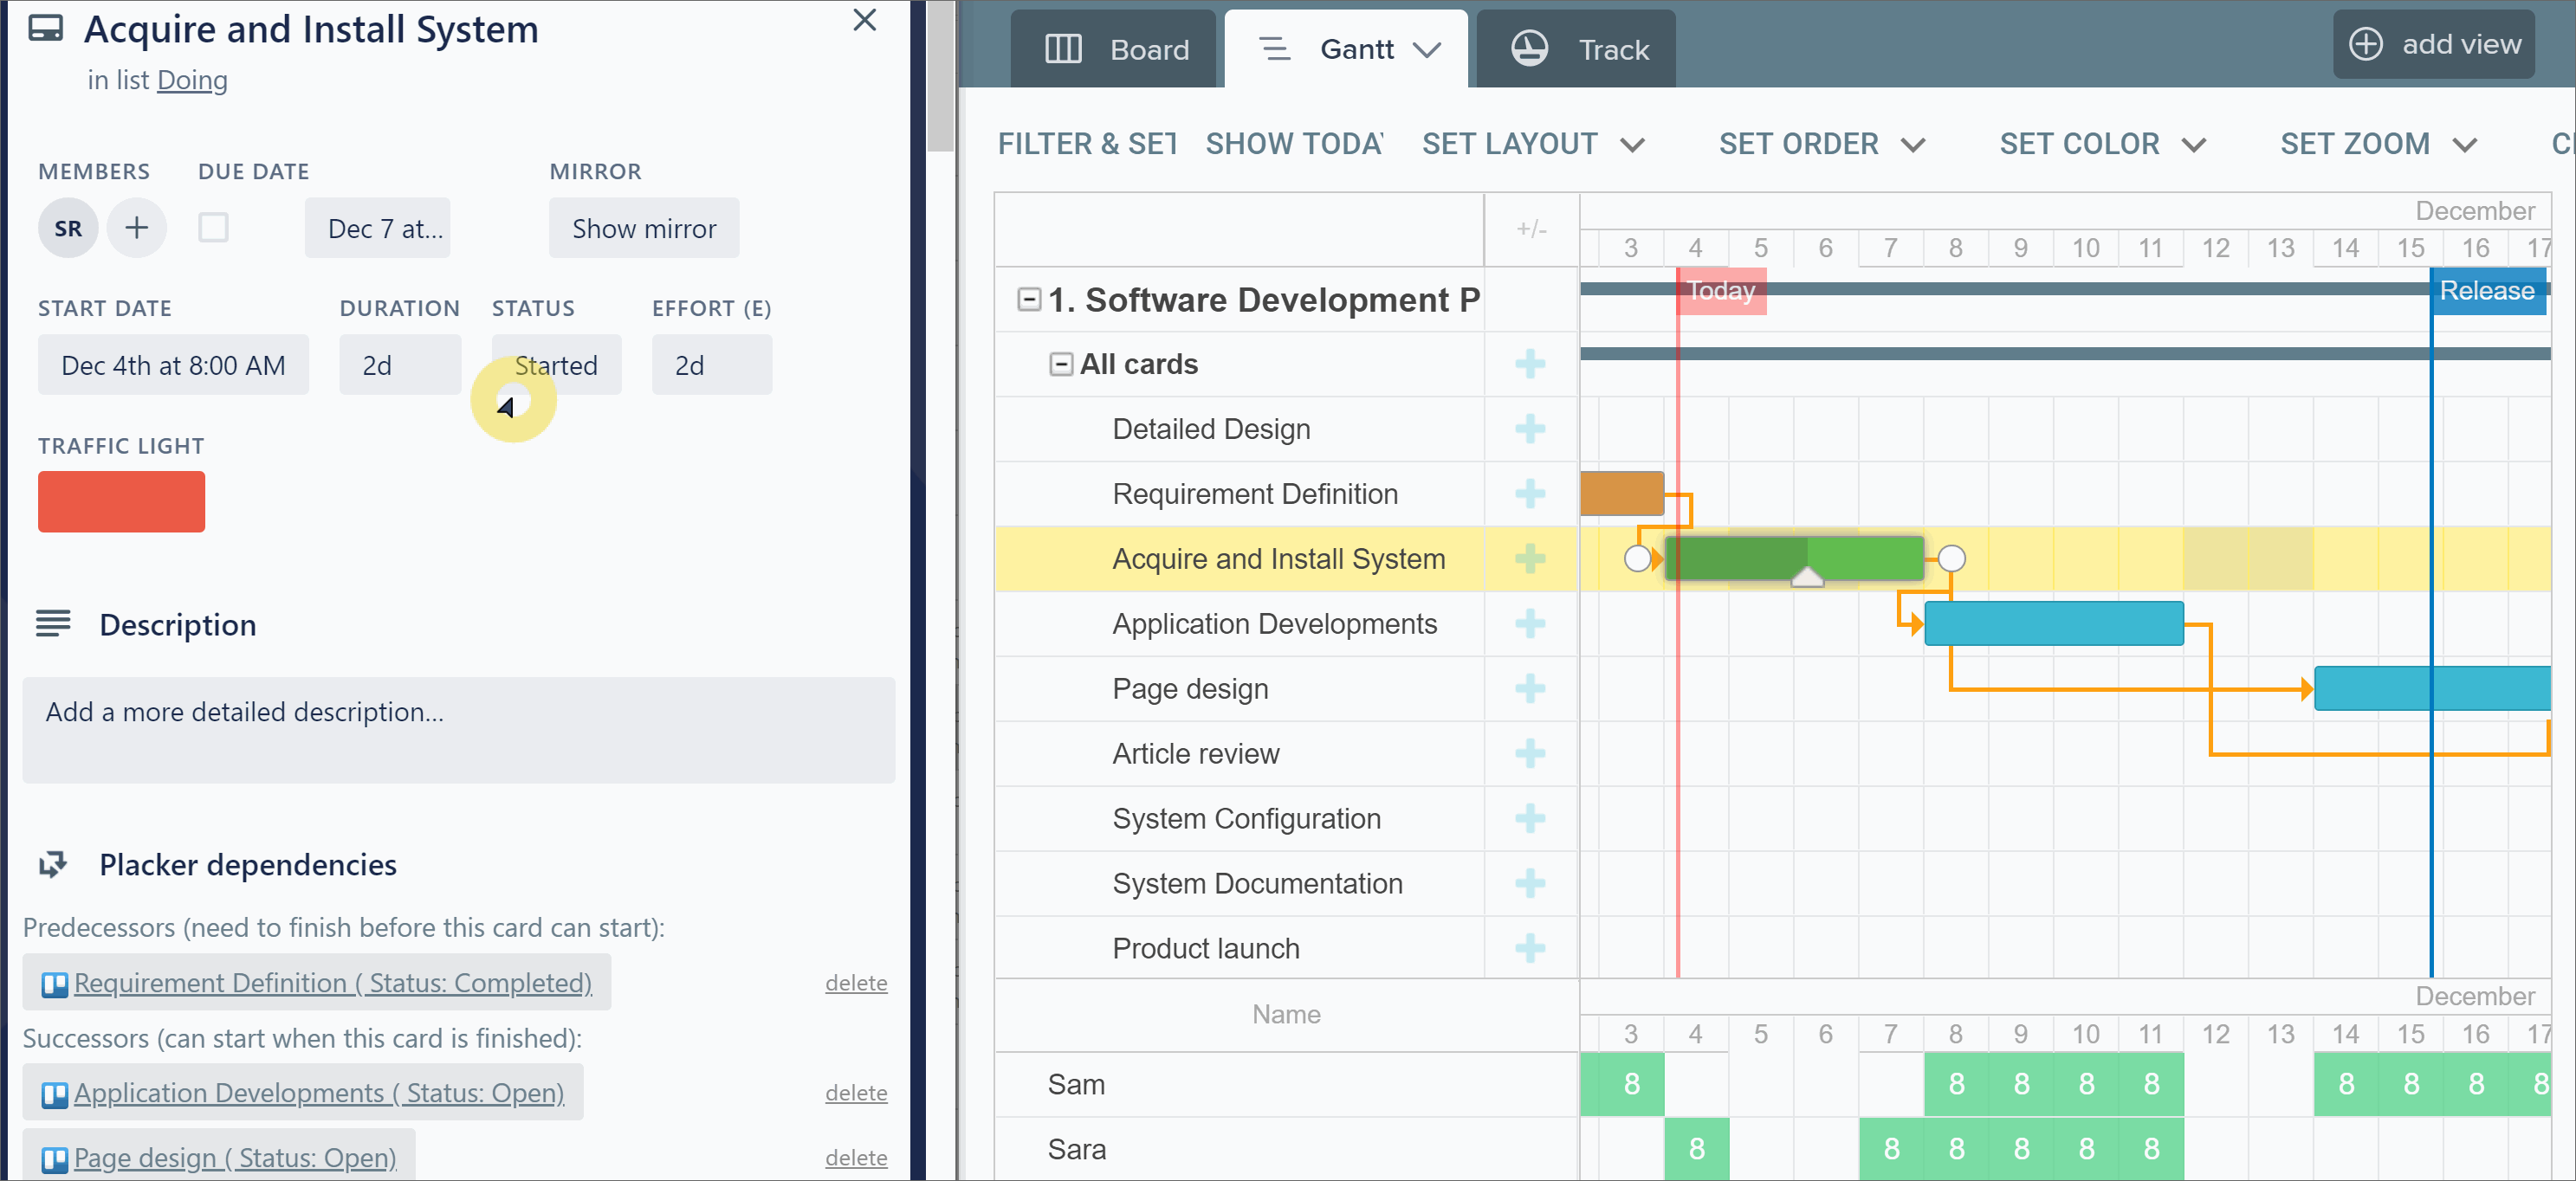 Placker creates Gantt chart based on Trello boards and cards